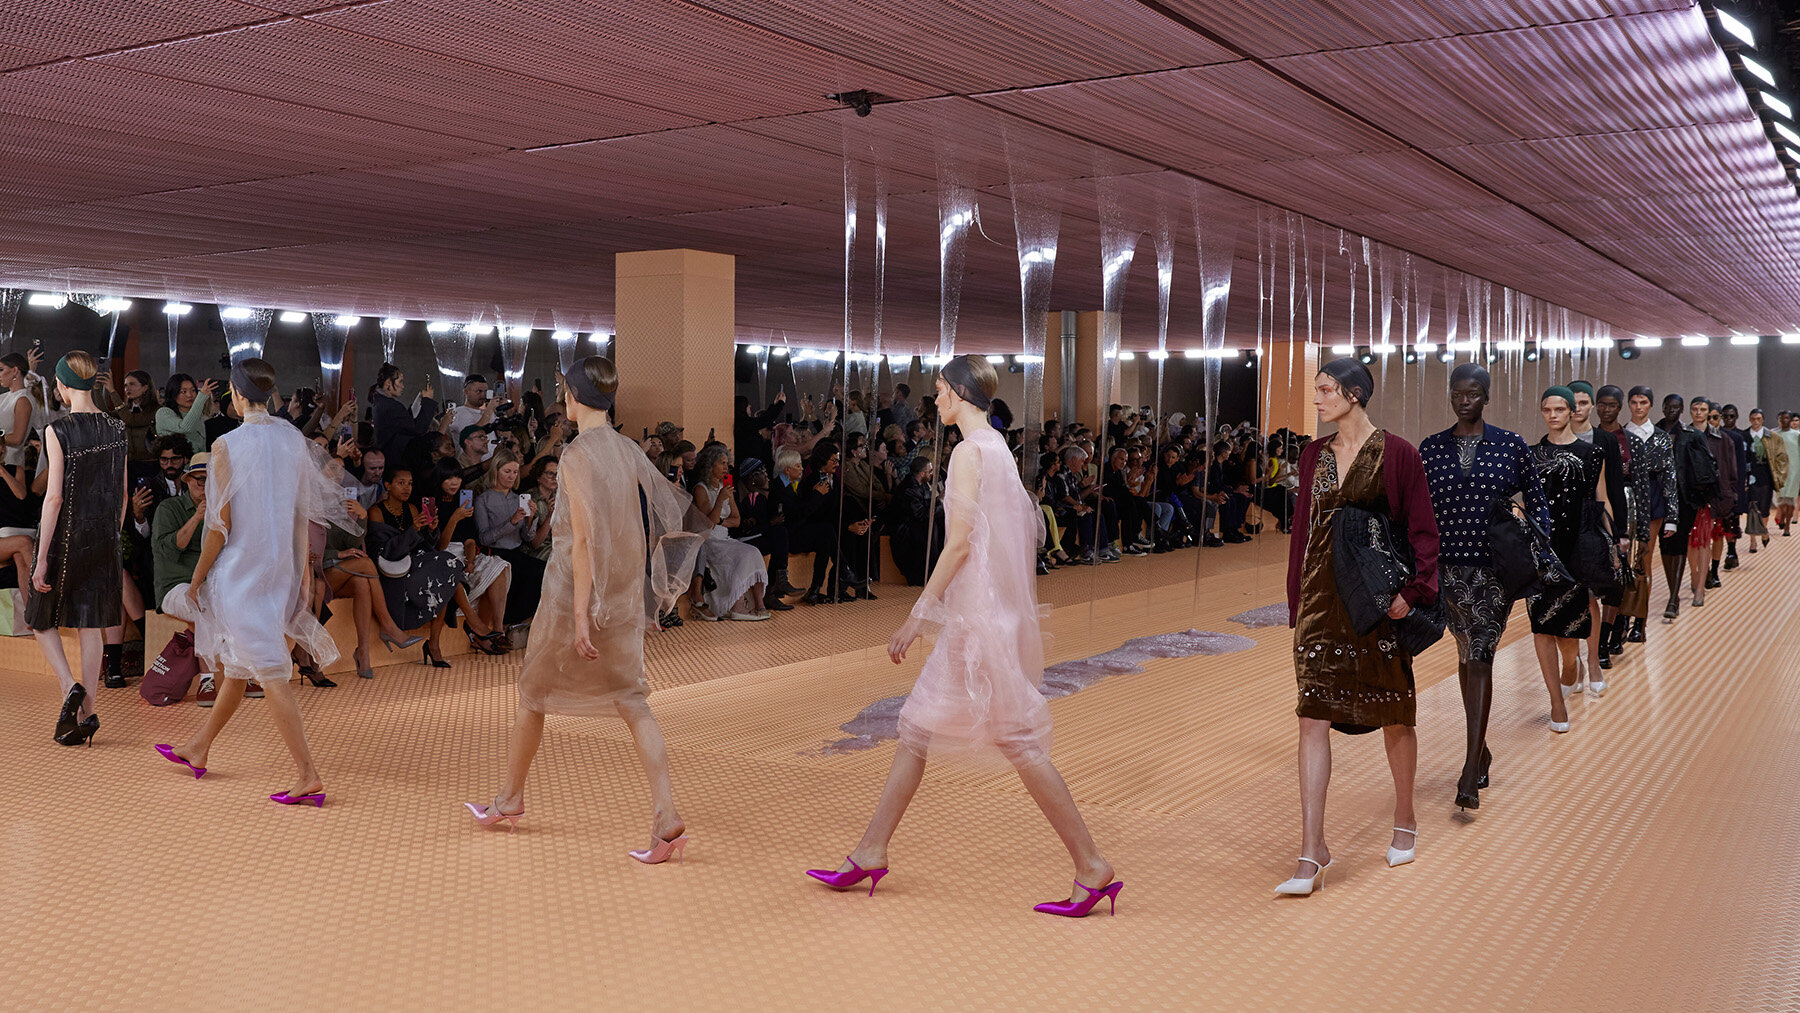 Prada: Light, haze, fluidity and a little slime in great clothes